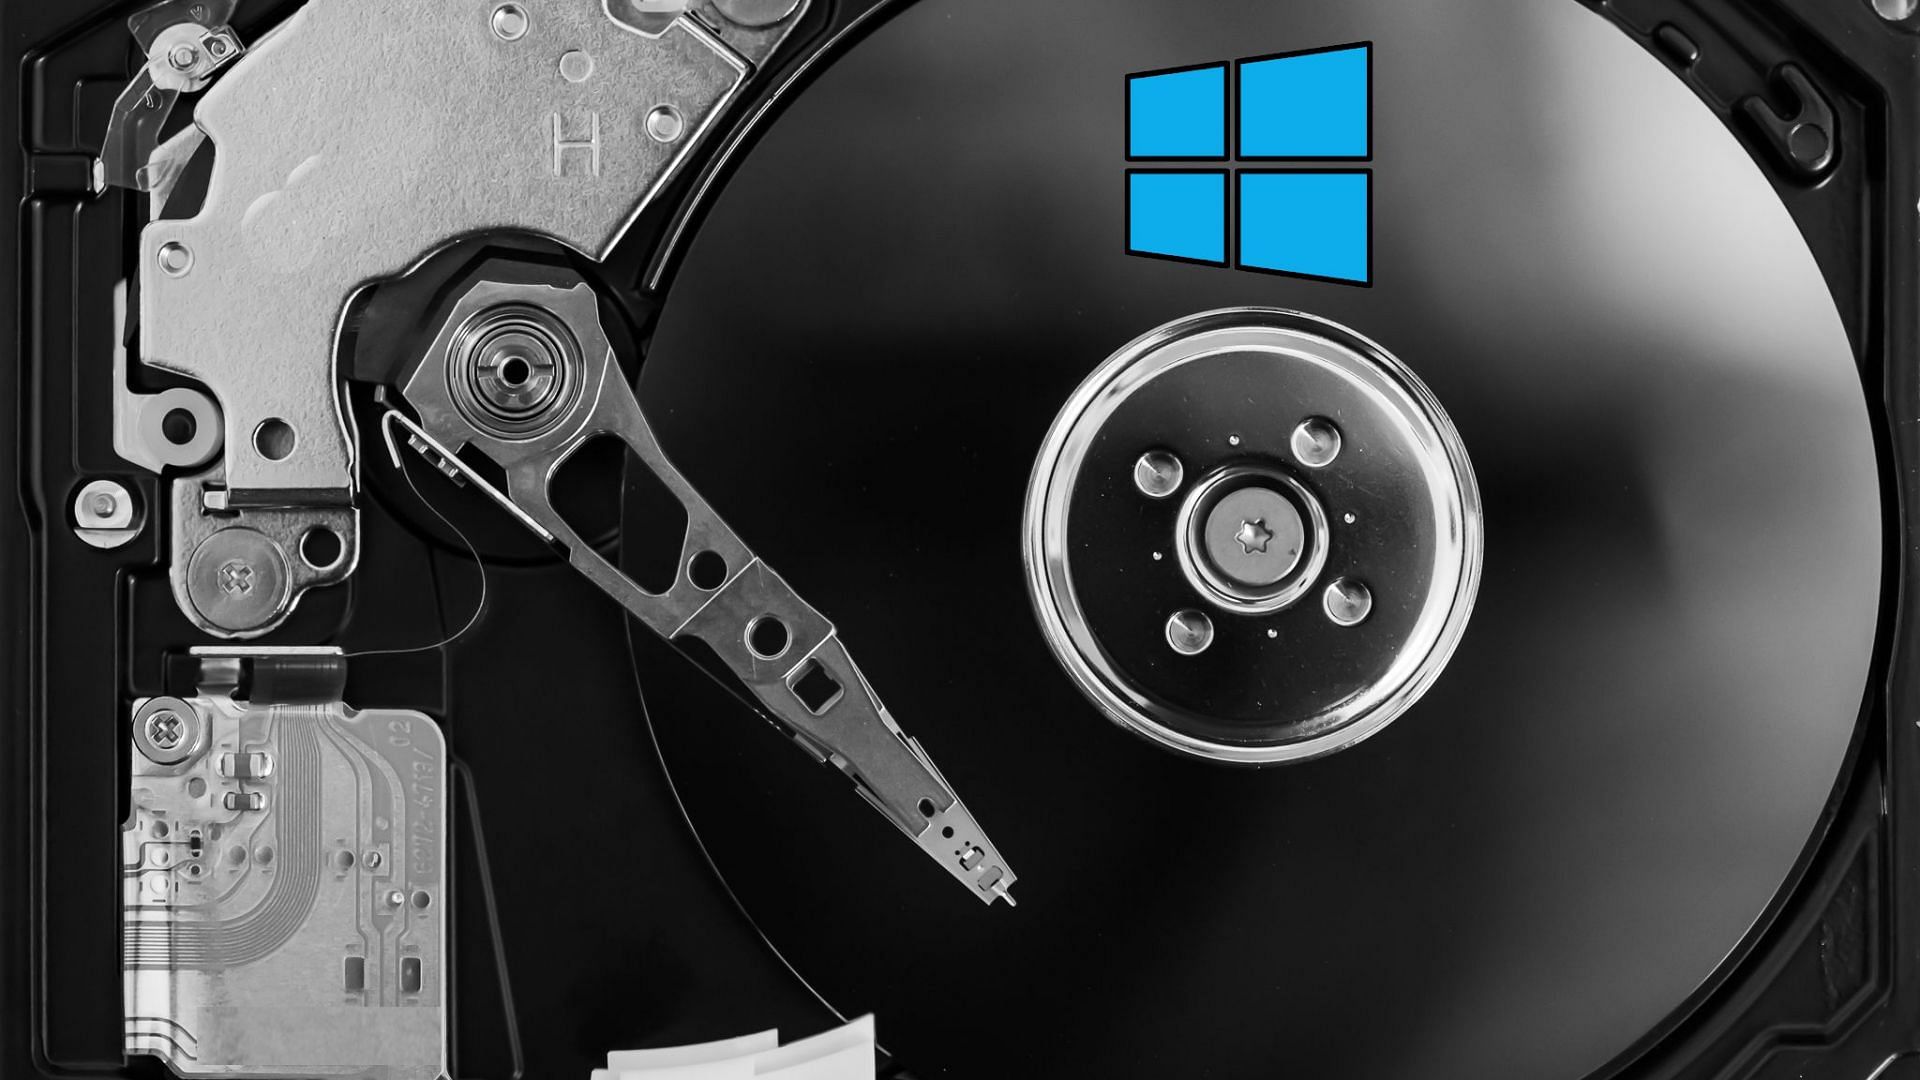 Manage disk partitions in Windows without any software (Image via Flickr)